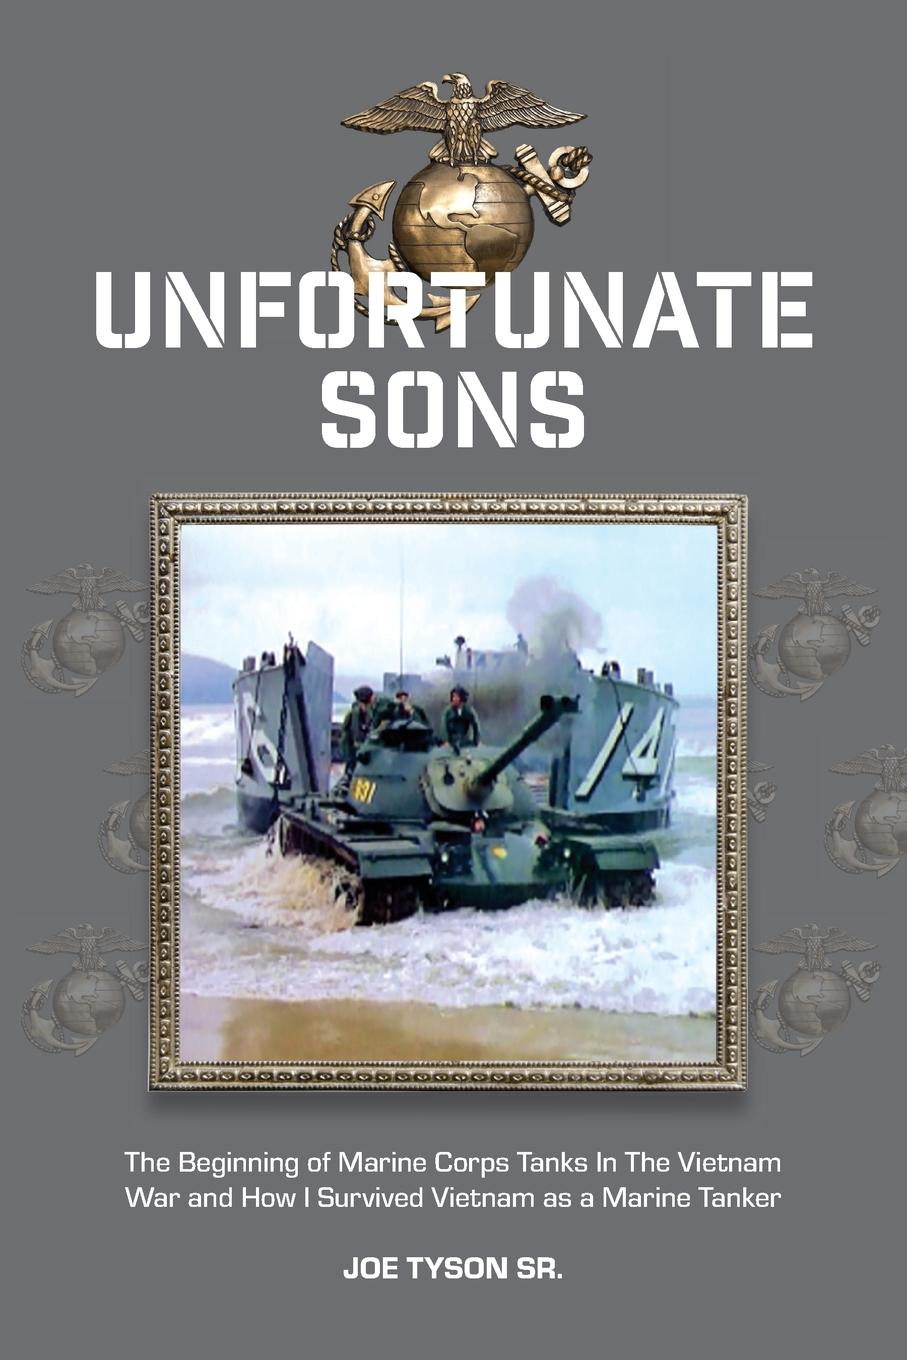 Unfortunate Sons. The Beginning of Marine Corps Tanks In The Vietnam War and how I survived Vietnam as a marine tanker